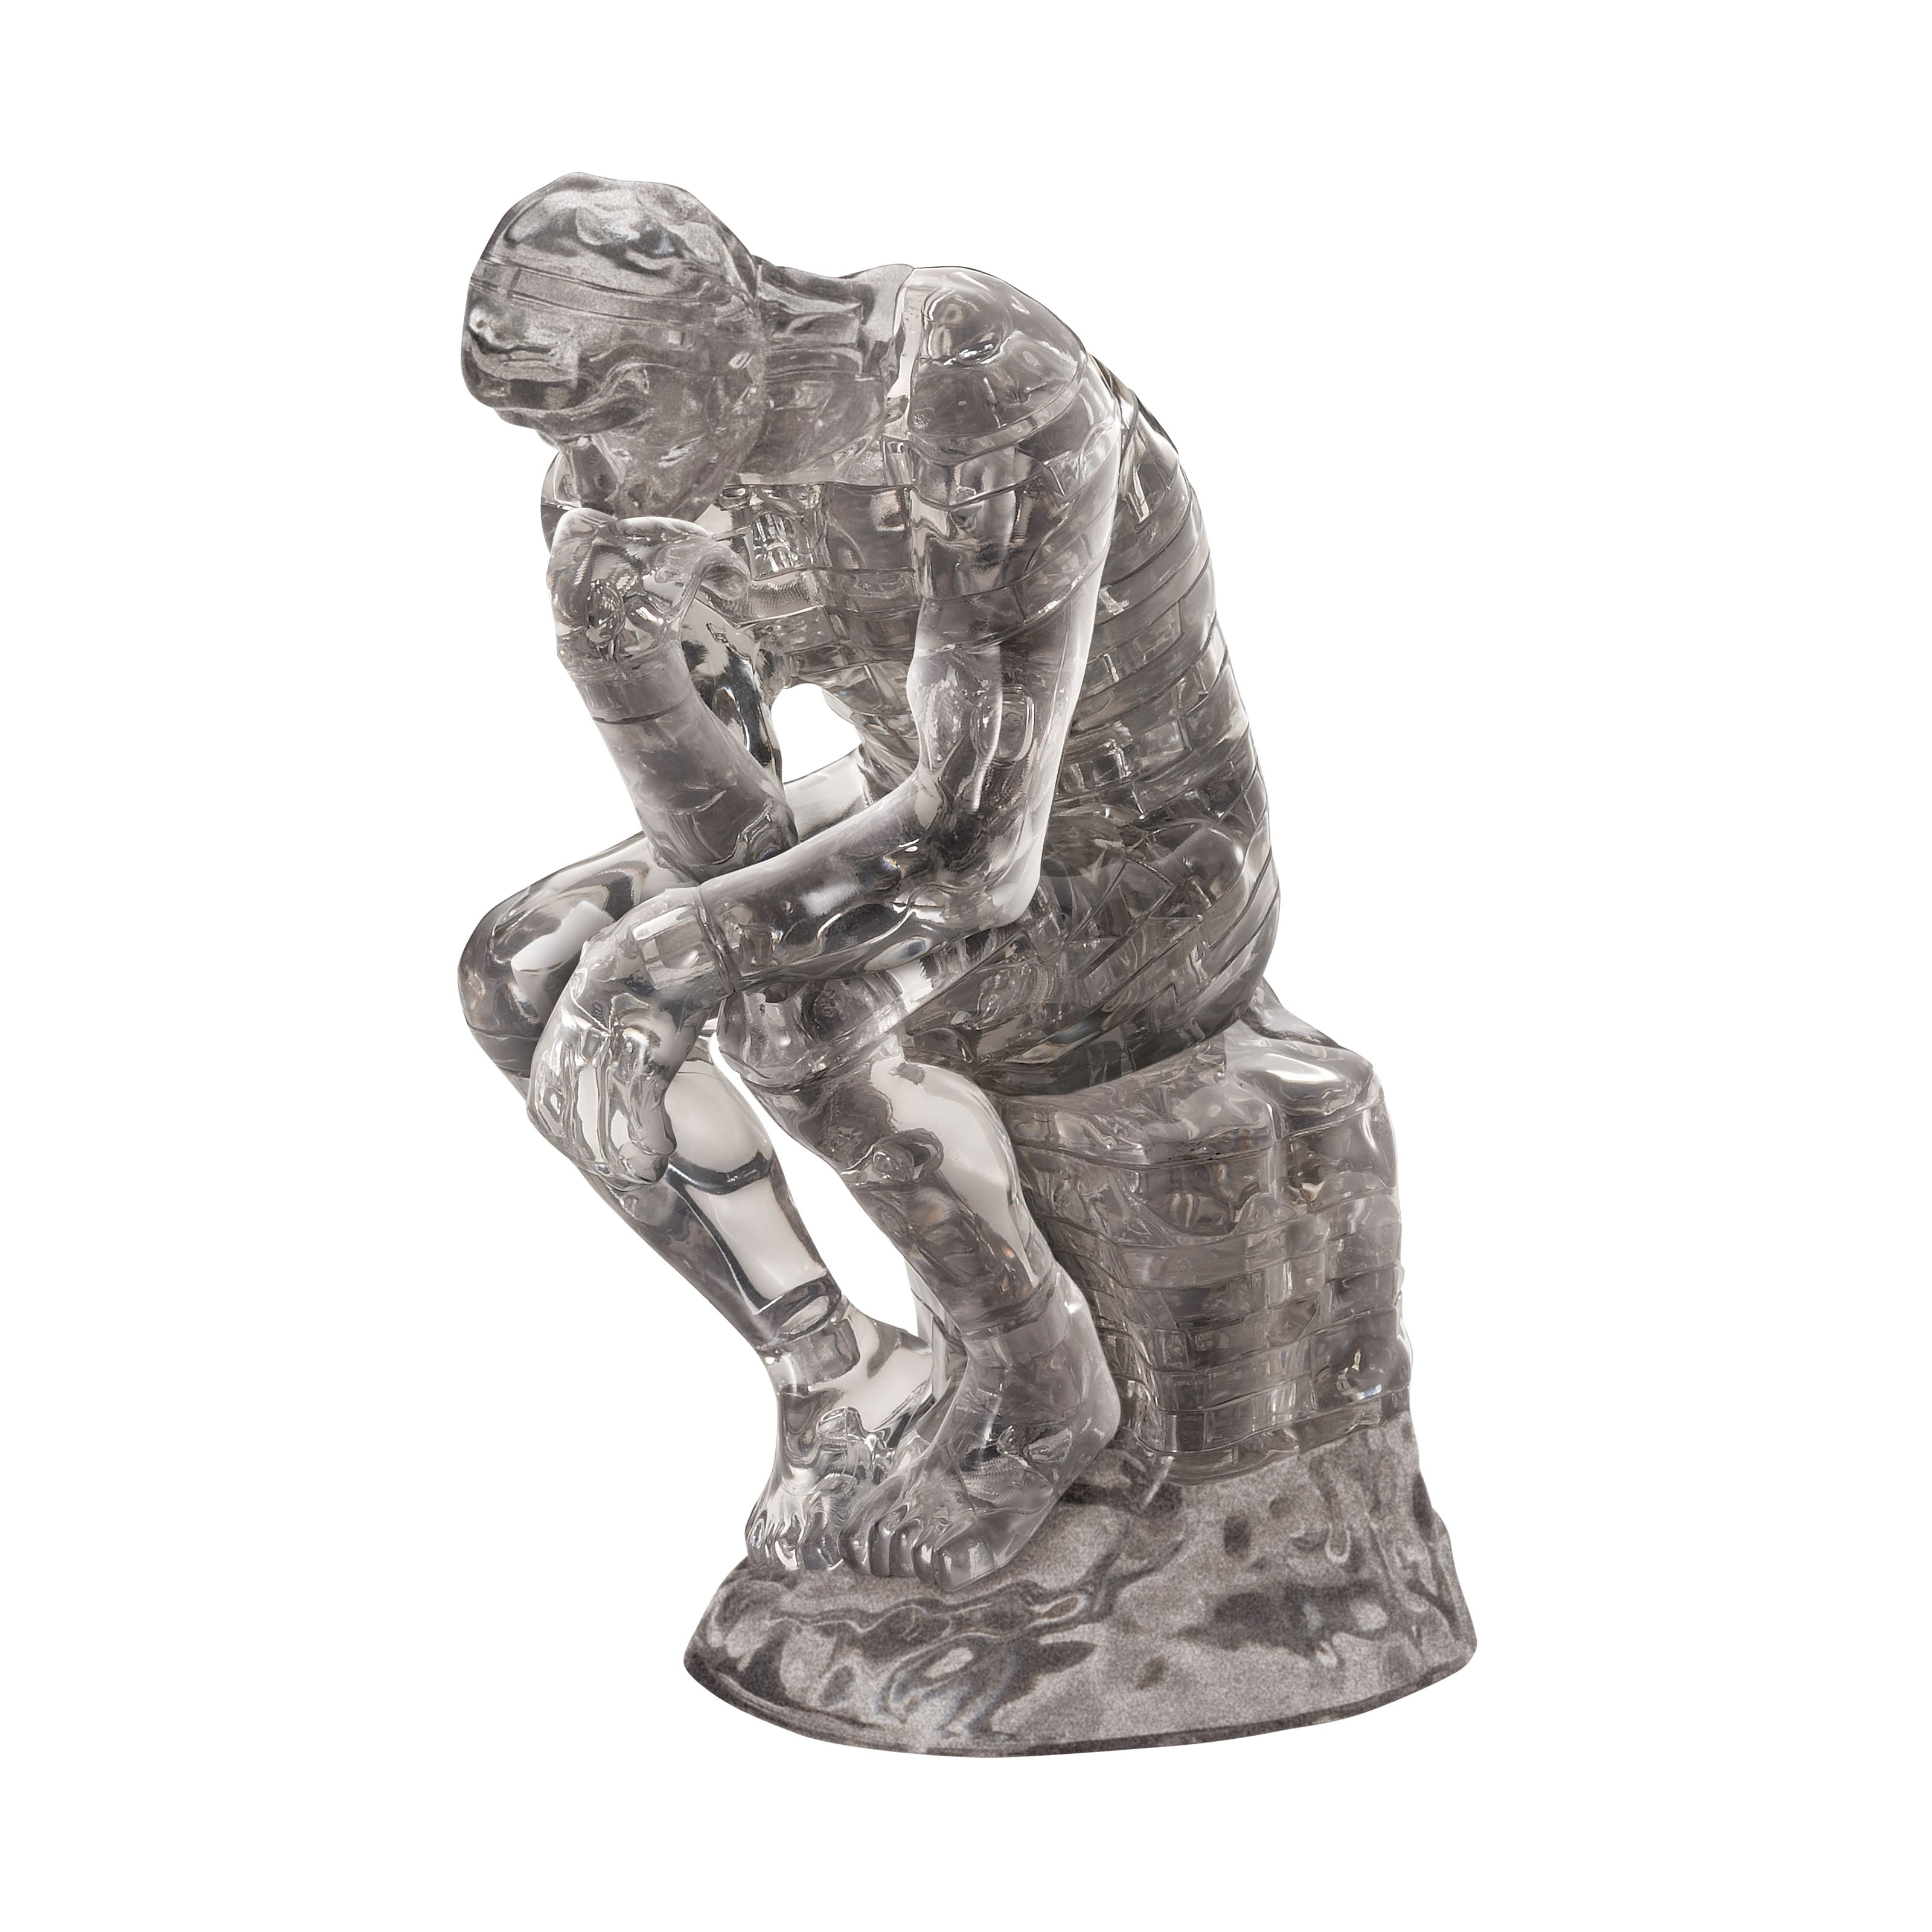 3D Crystal Puzzle - The Thinker (Clear): 43 Pcs